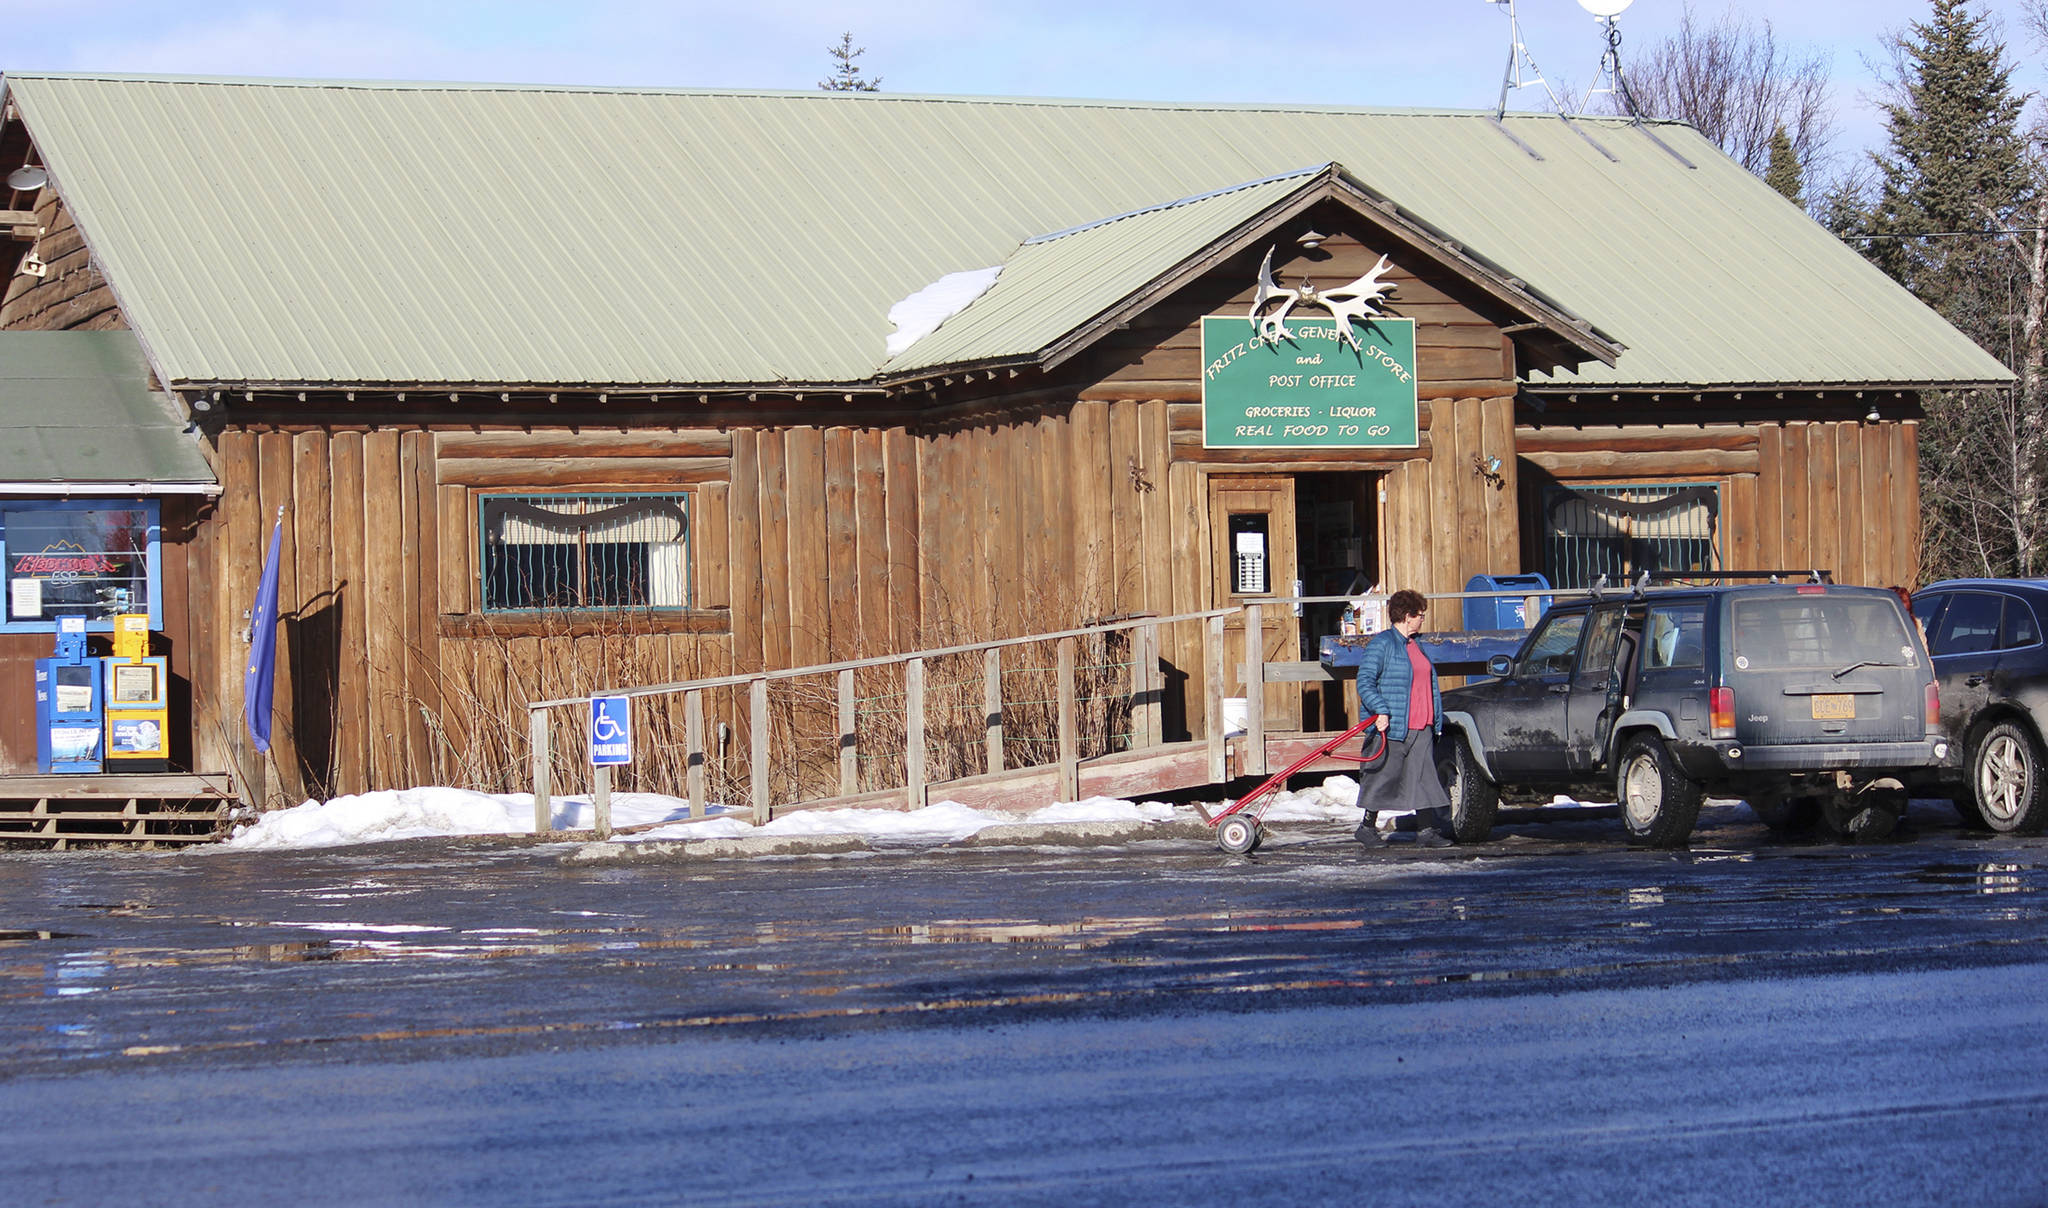 In this Feb. 26, 2019 photo is the Fritz Creek General Store, shown near Homer, Alaska. A cat named Stormy that has spent more than six years as a fixture in a remote Alaska general store is being forced out after officials notified the store owners that the cat’s presence violates food safety standards. (Megan Pacer | Homer News via AP)